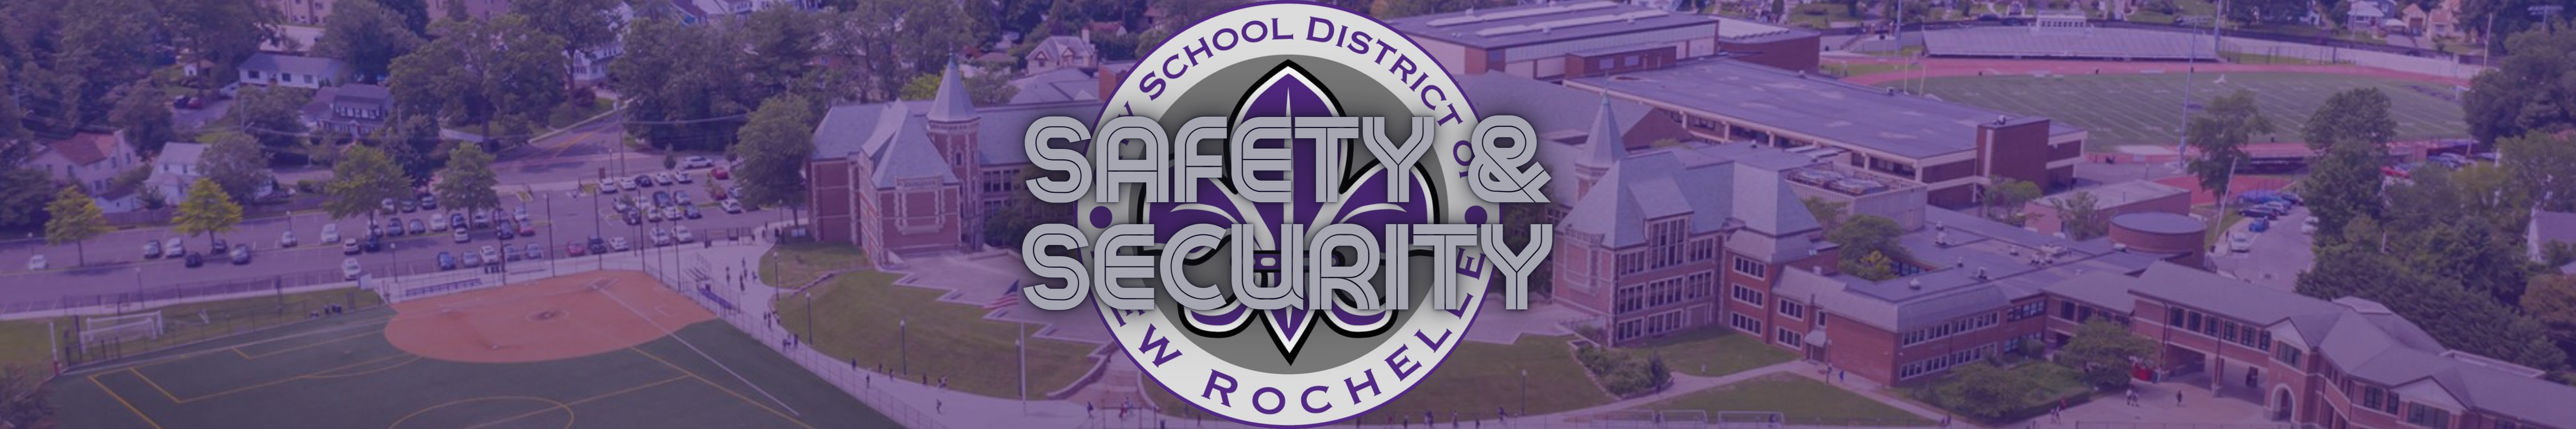 Safety & Security banner